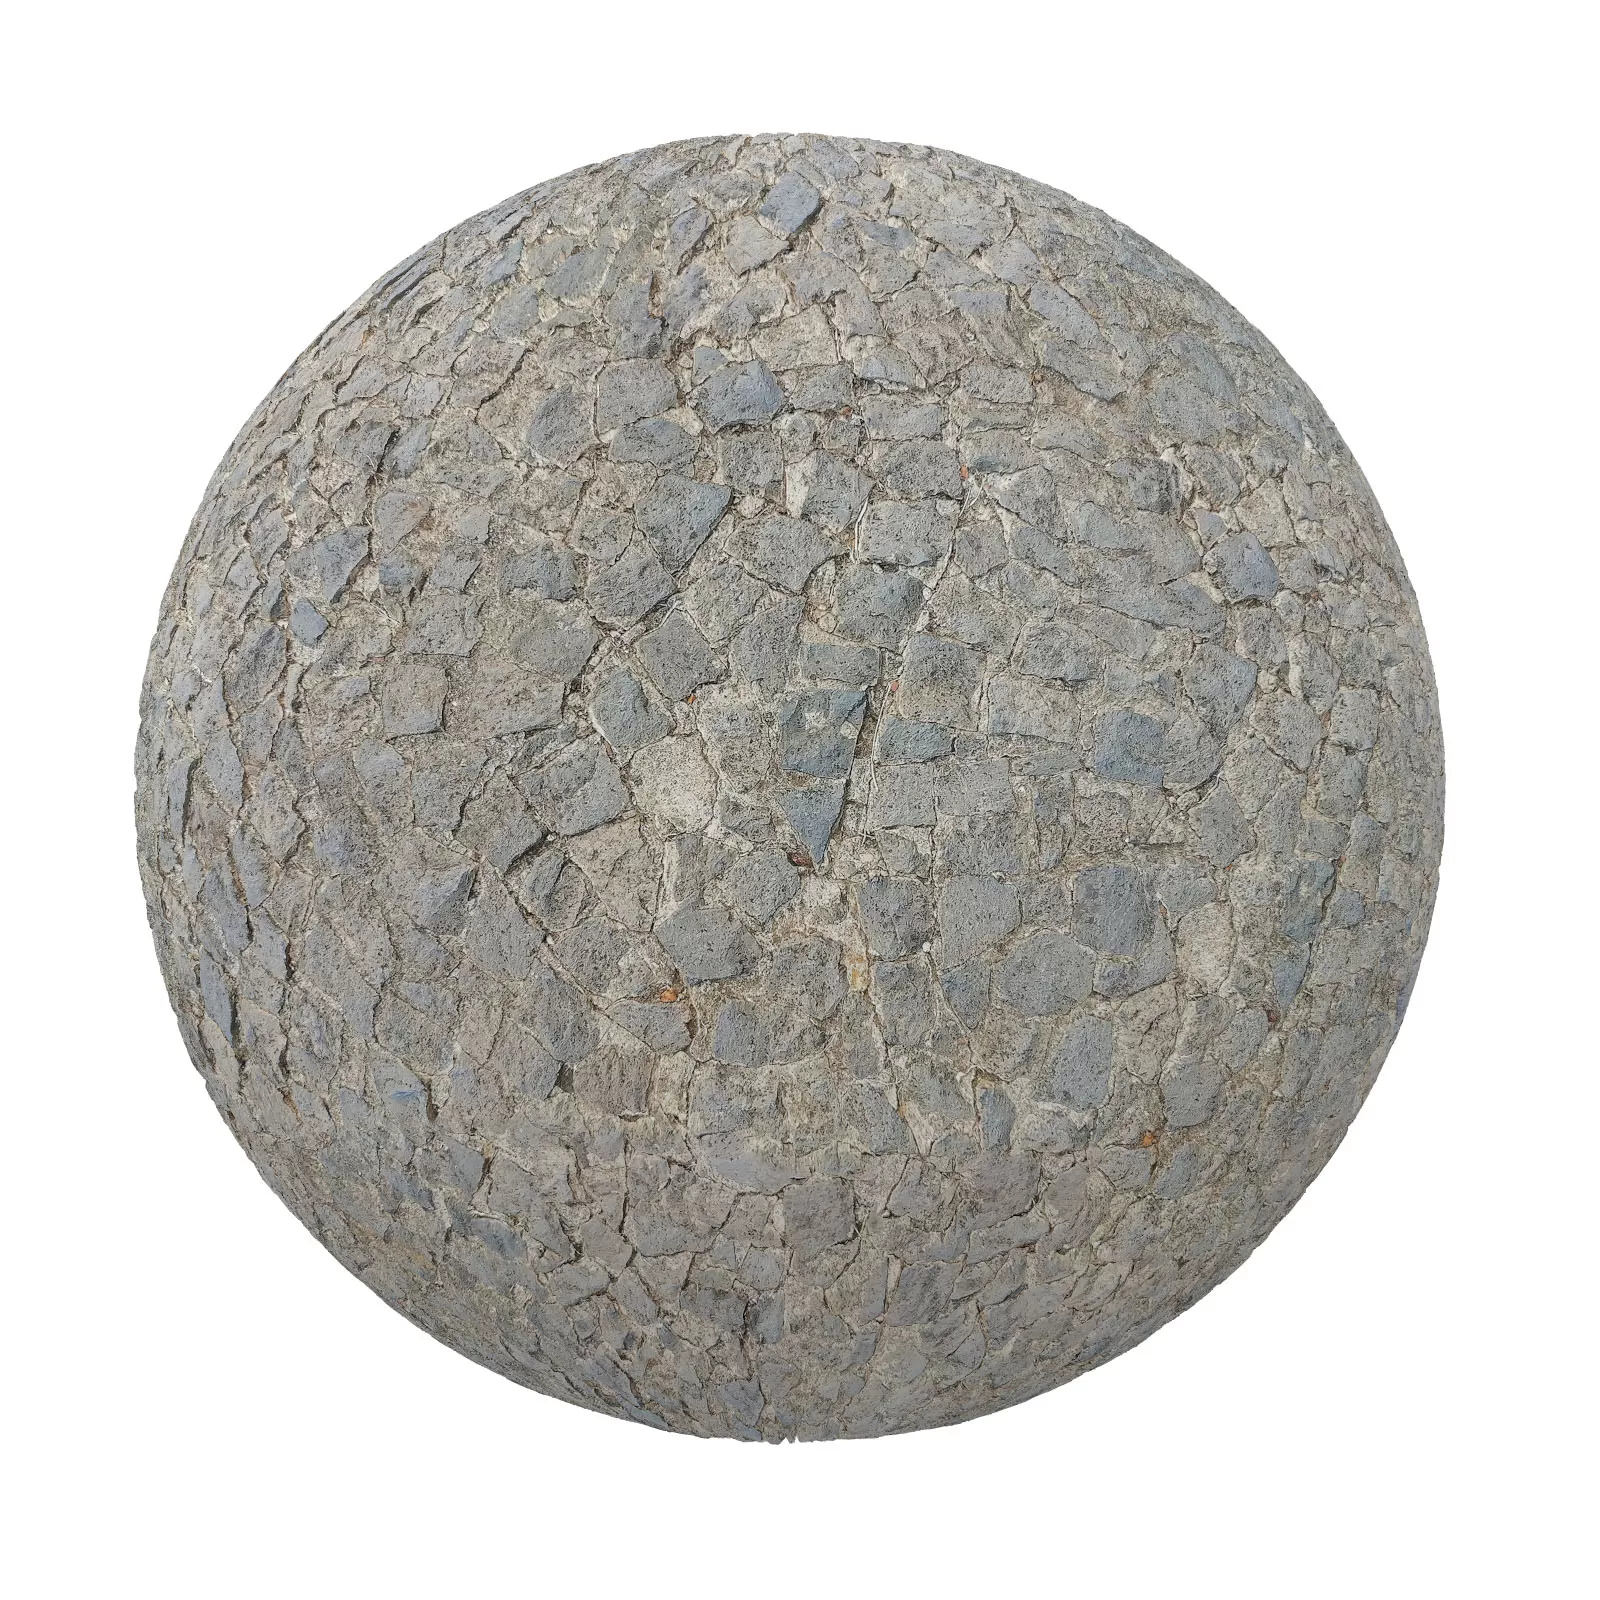 PBR CGAXIS TEXTURES – PAVEMENTS – Stone Pavement 7